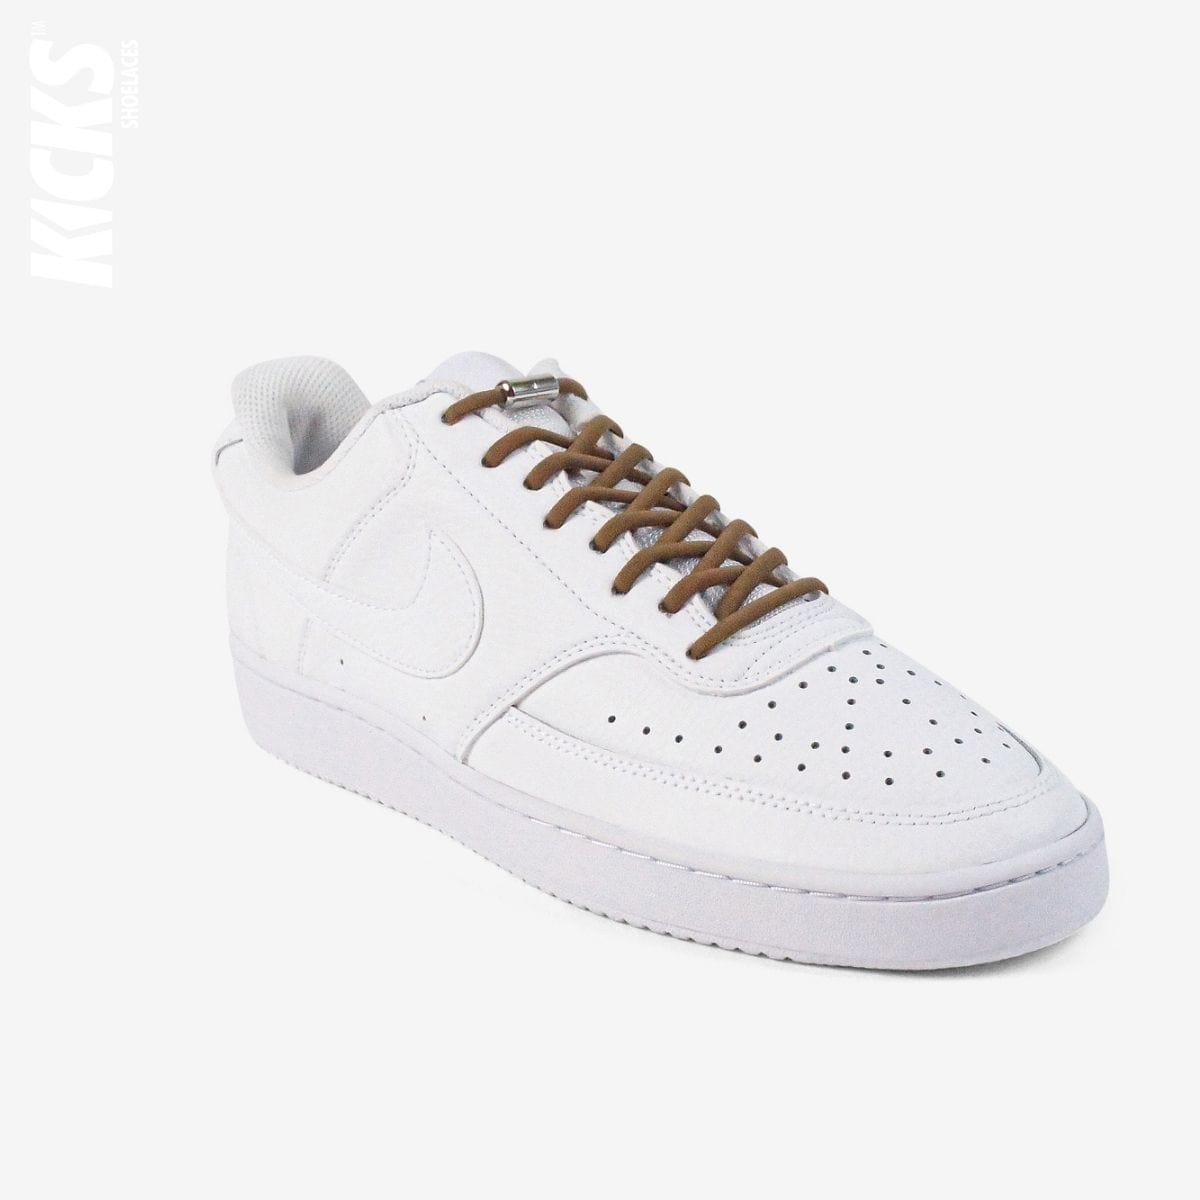 round-no-tie-shoelaces-with-brown-laces-on-nike-white-sneakers-by-kicks-shoelaces